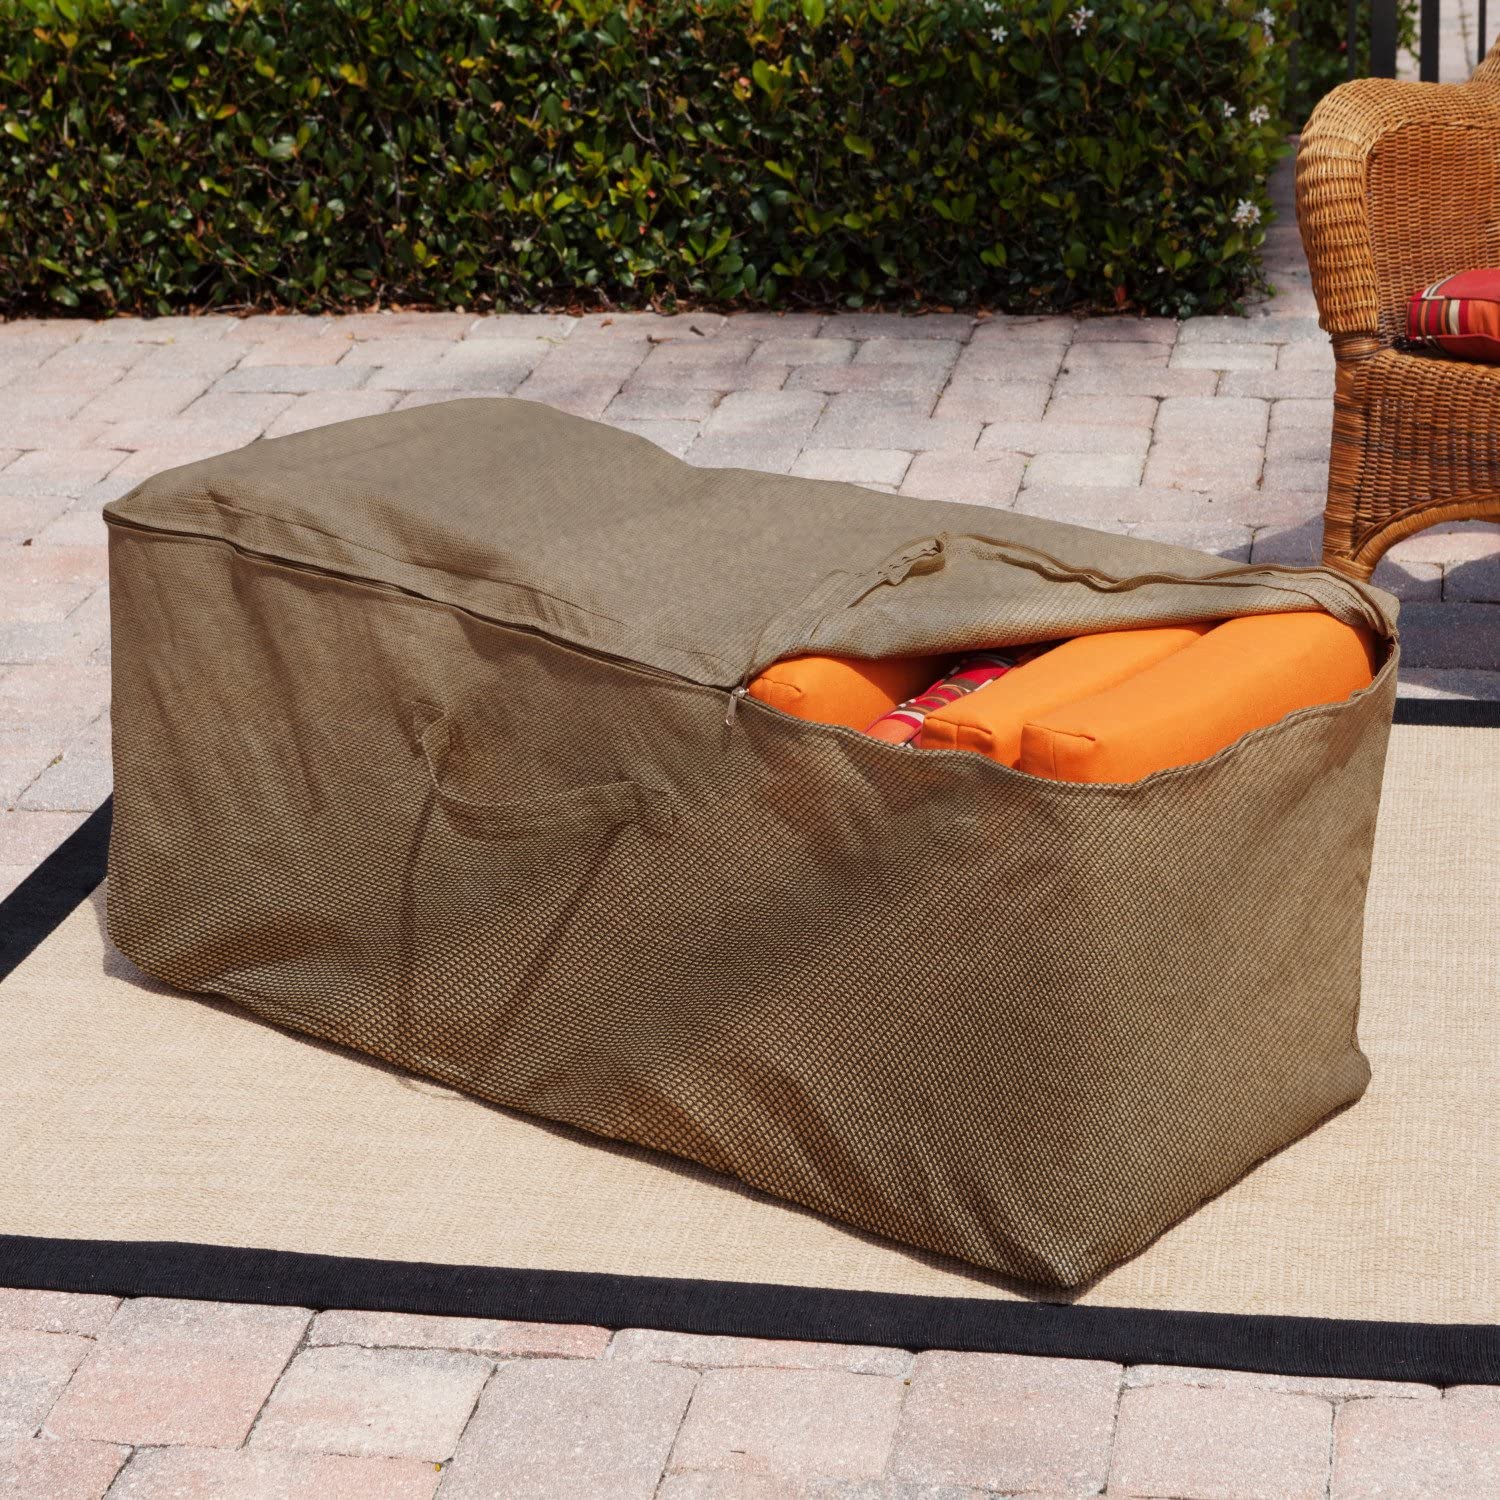 Outdoor Waterproof Garden Furniture Cushion Storage Bag Case Pouch Large Tools